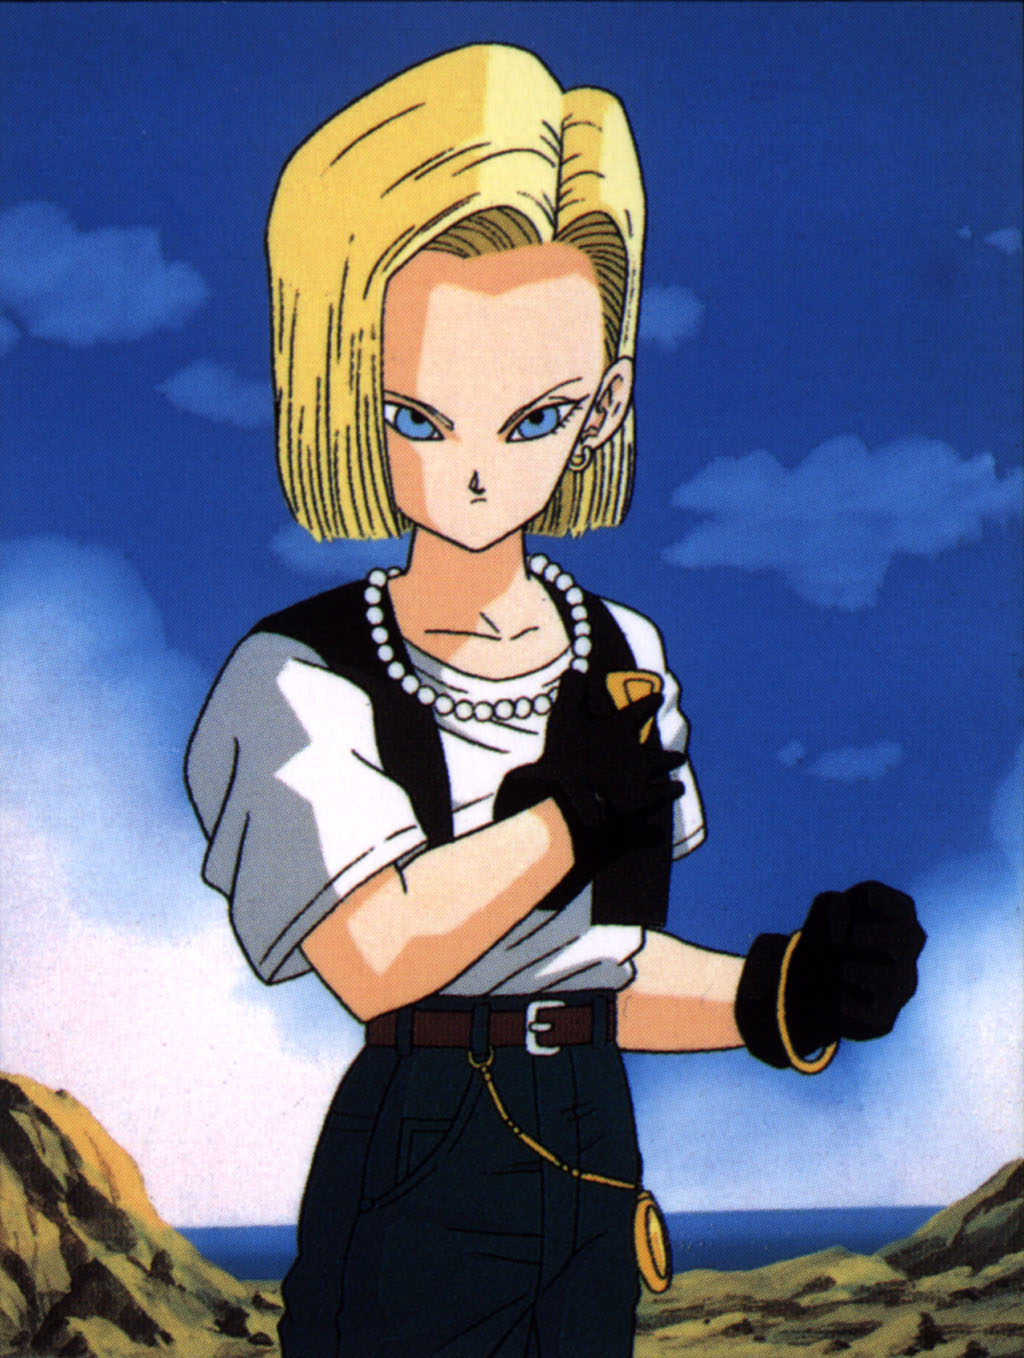 Dragon Ball Characters: Android #18 Dragonball Dbz Gt Characters